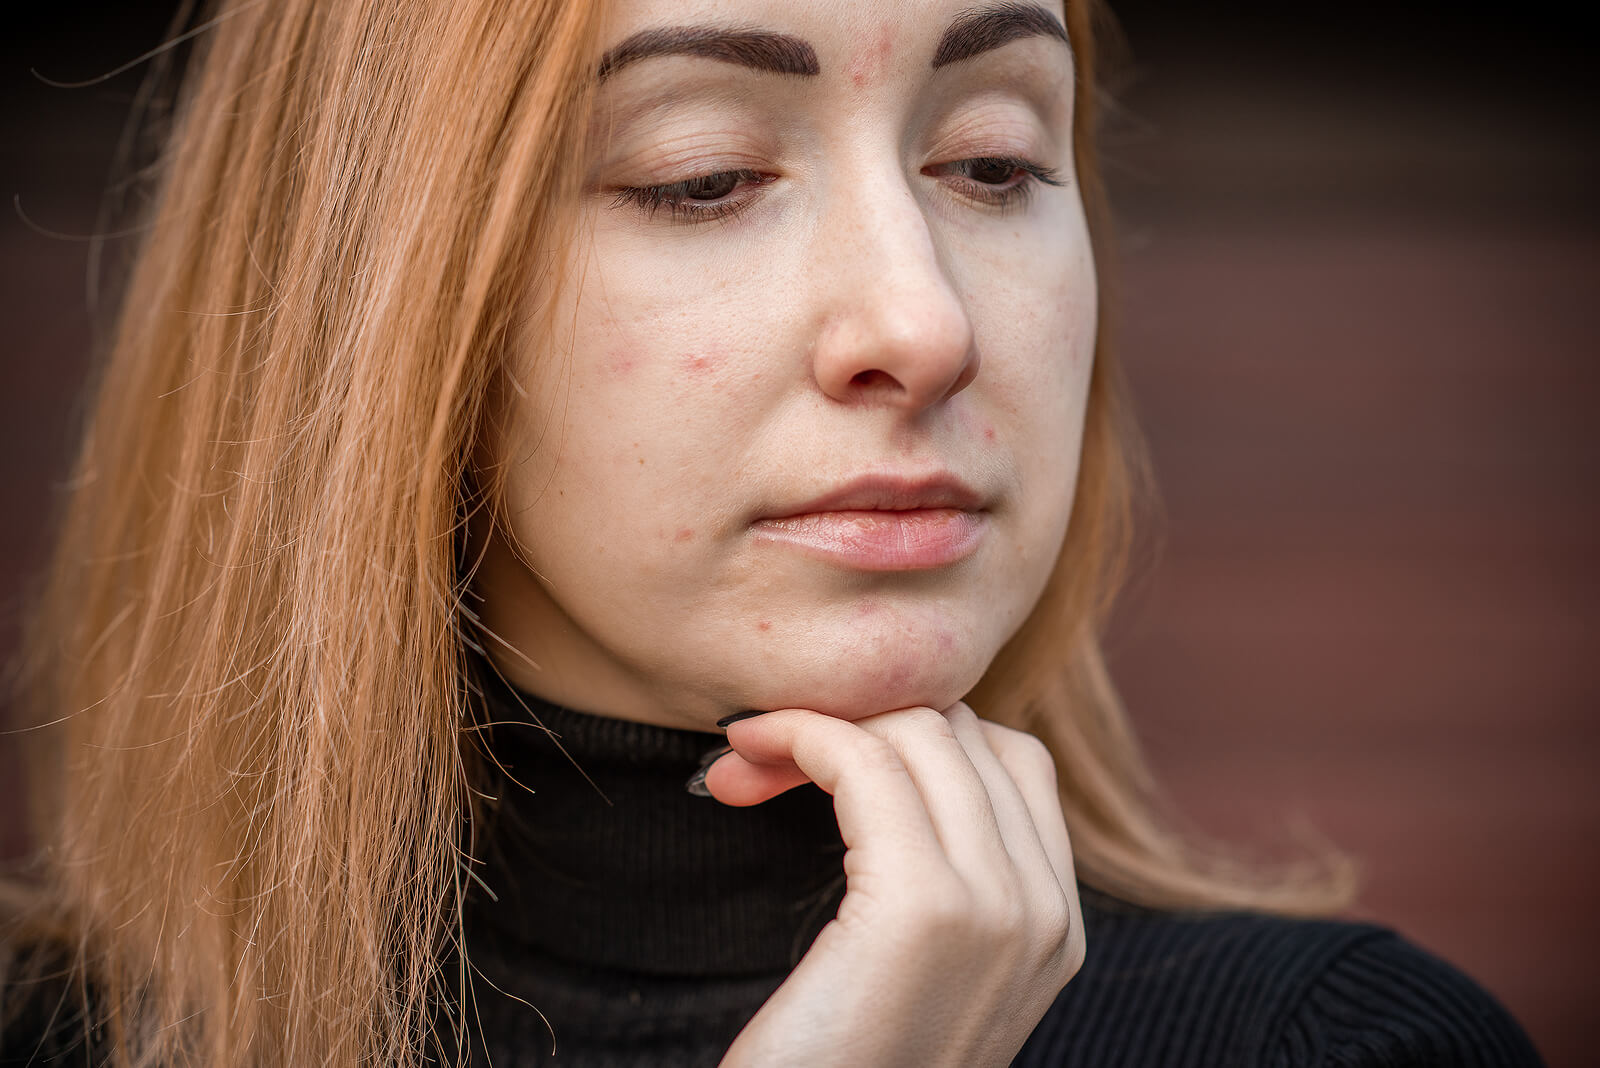 Acne is one of the most common skin problems in adolescence.